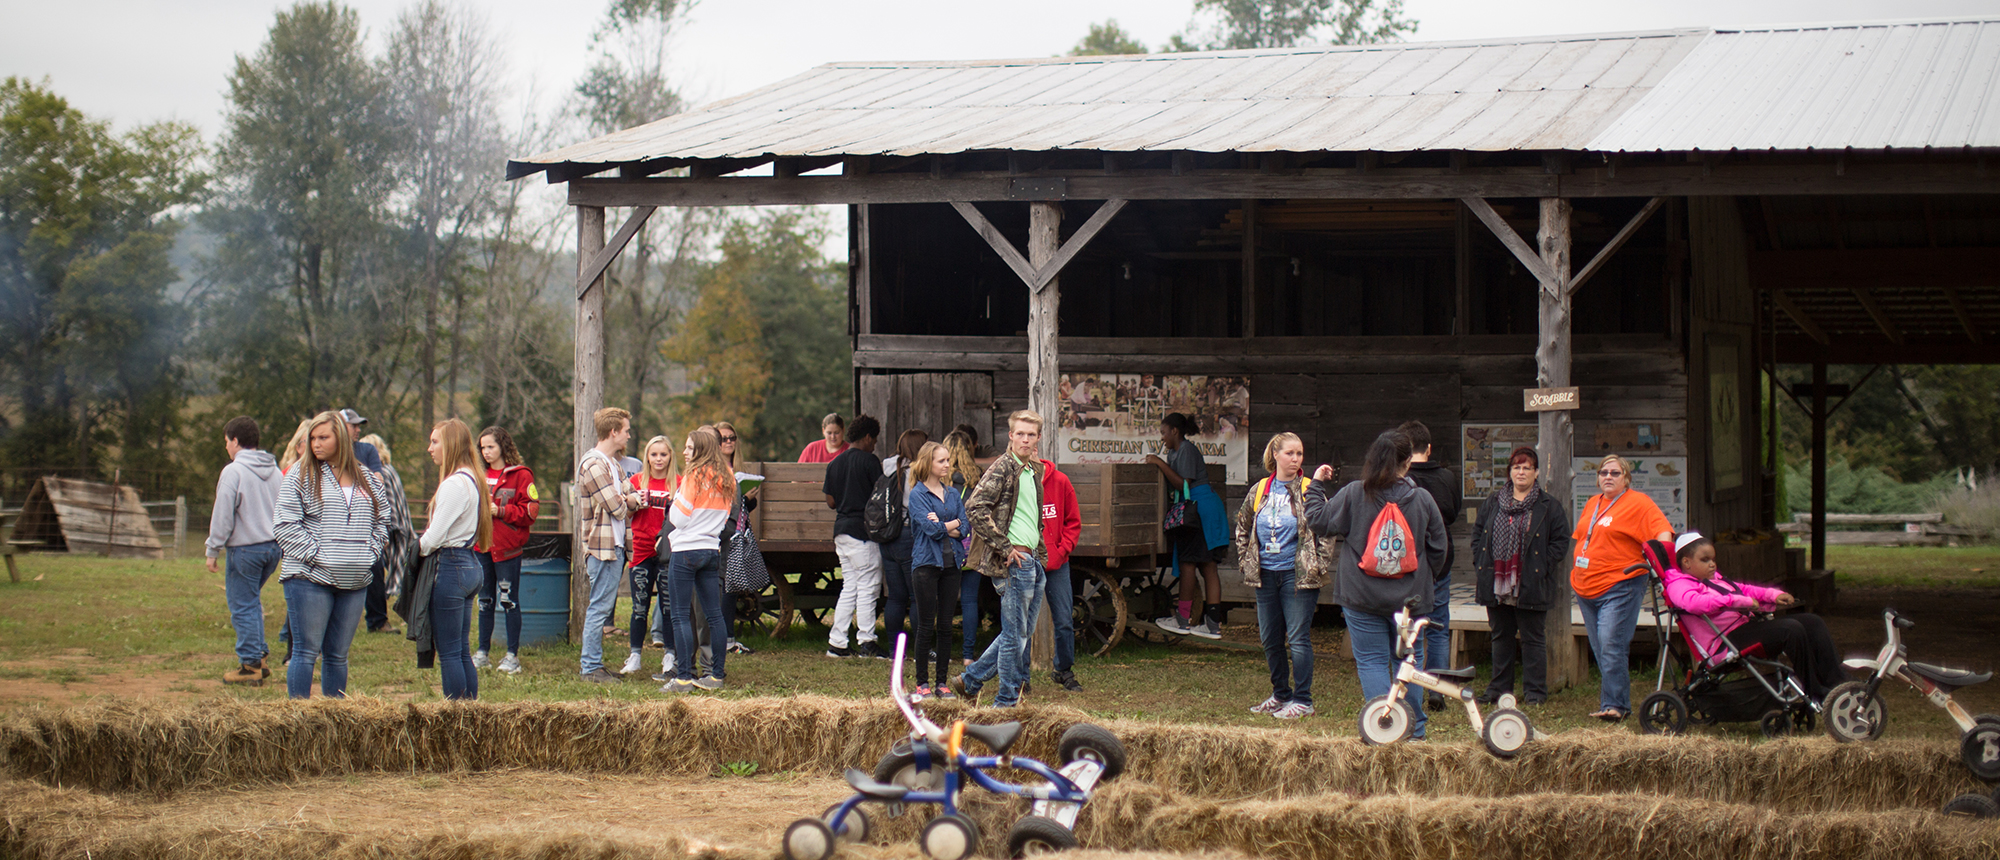 tricycle races at christian way farm